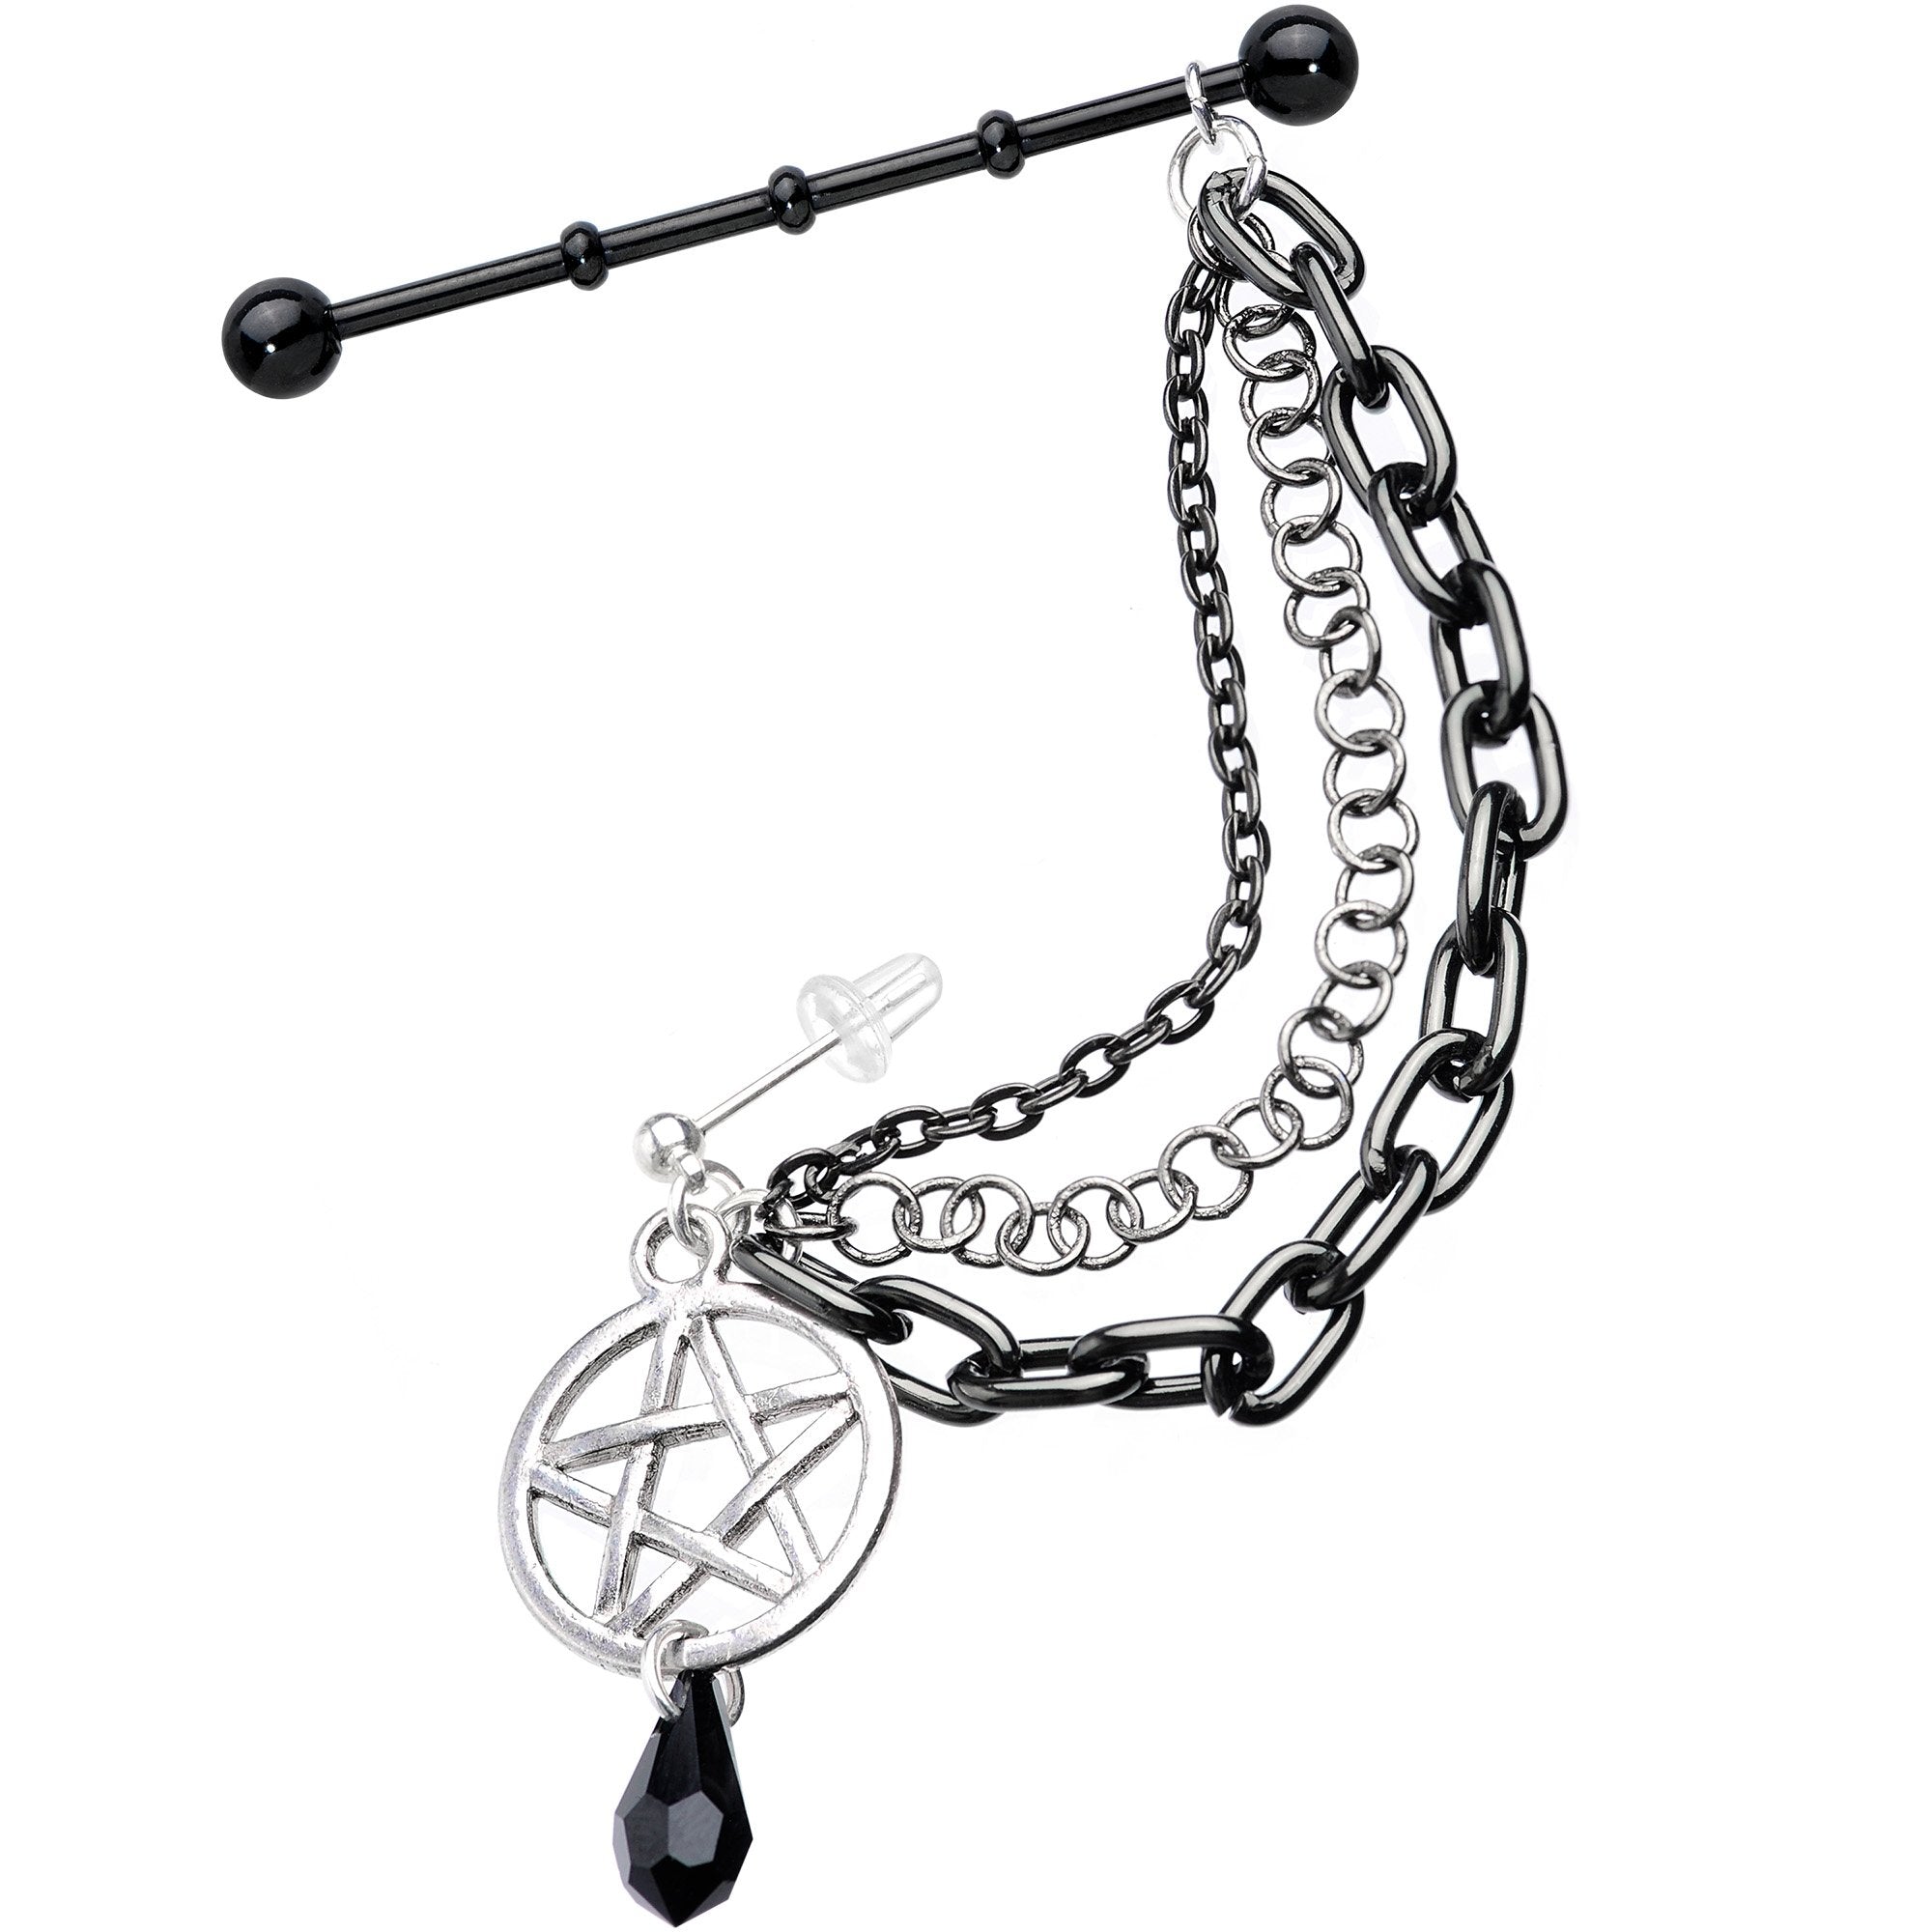 Pentagram Industrial Chain Earring Created with Crystals